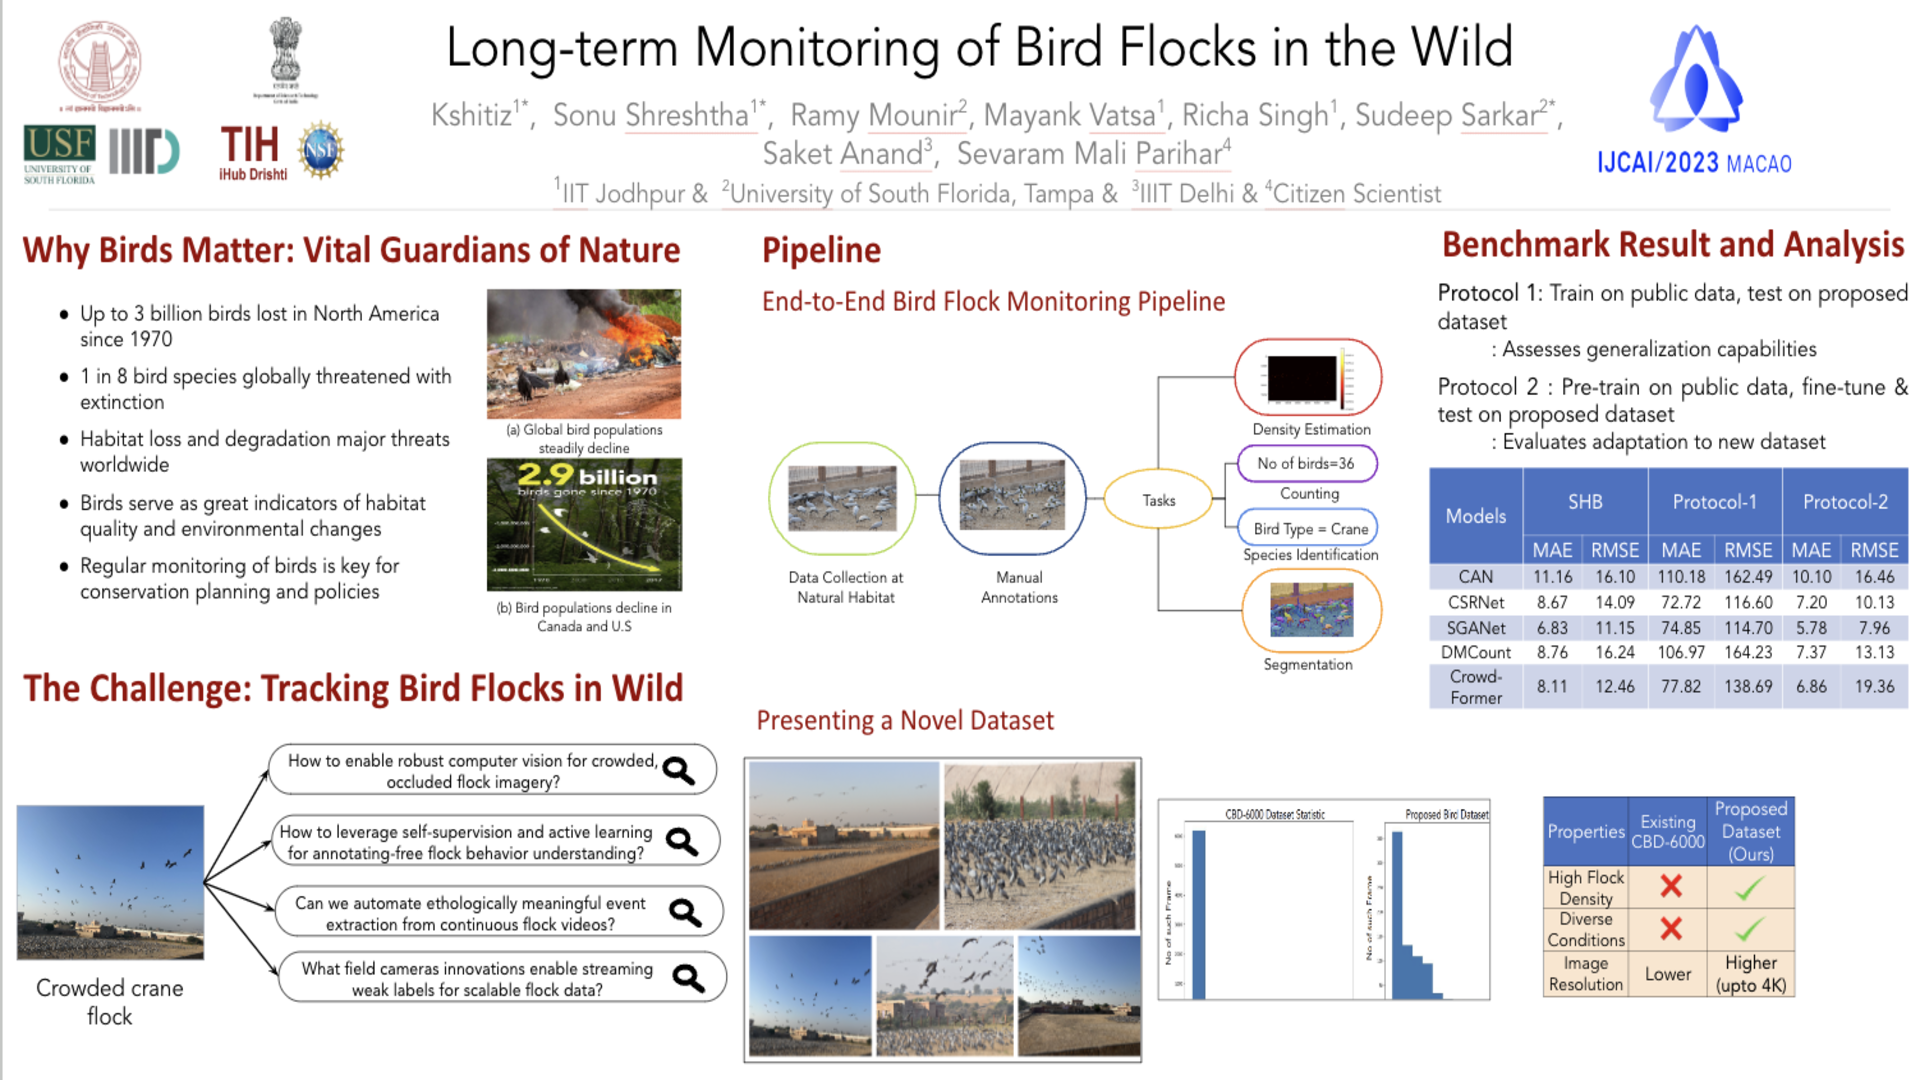 Long-term Monitoring Project Image